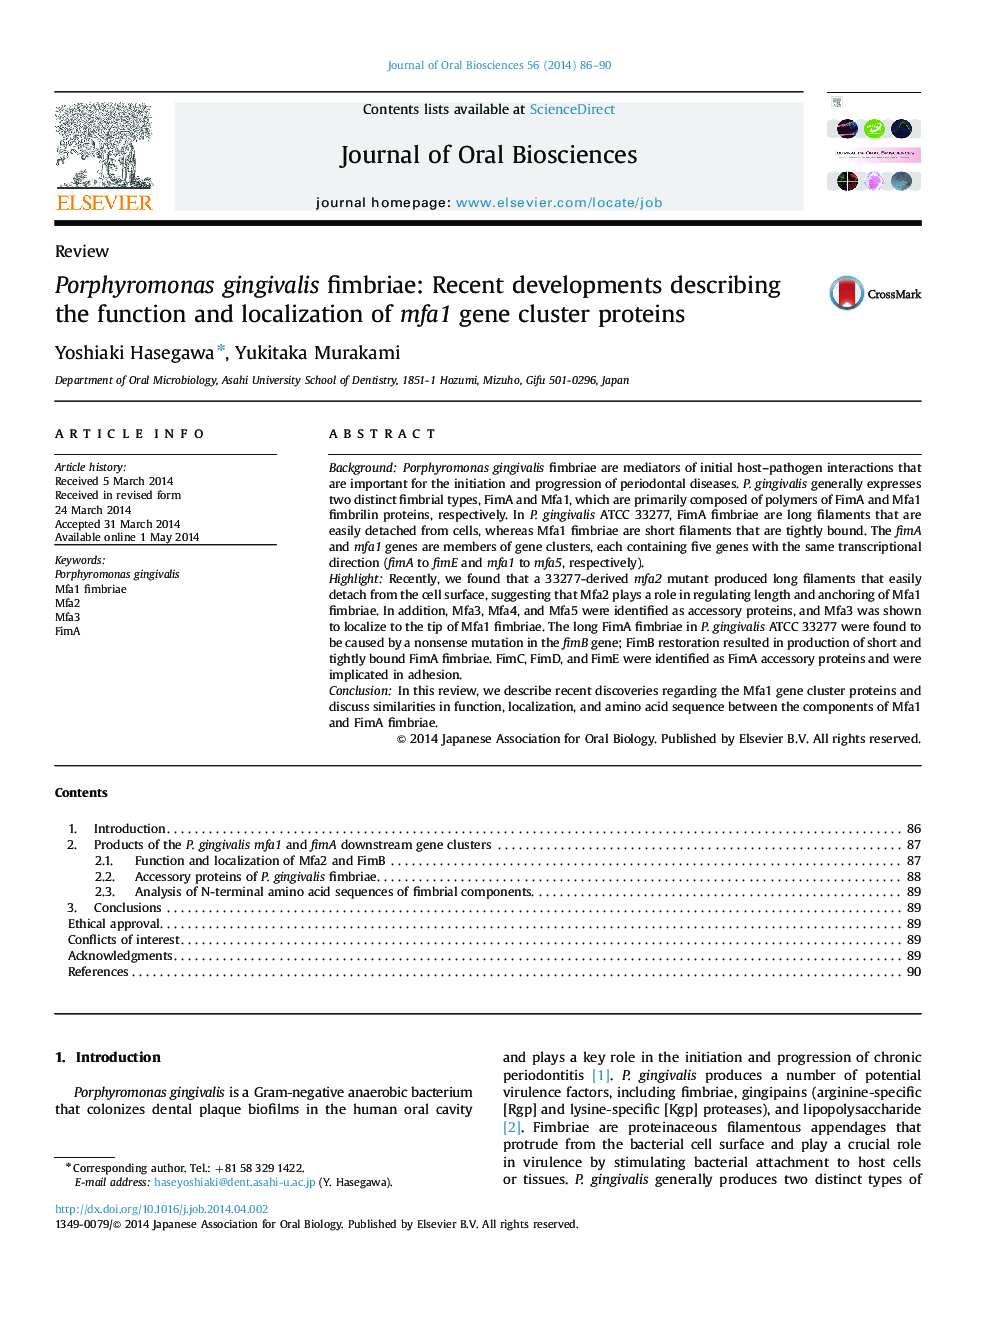 Porphyromonas gingivalis fimbriae: Recent developments describing the function and localization of mfa1 gene cluster proteins